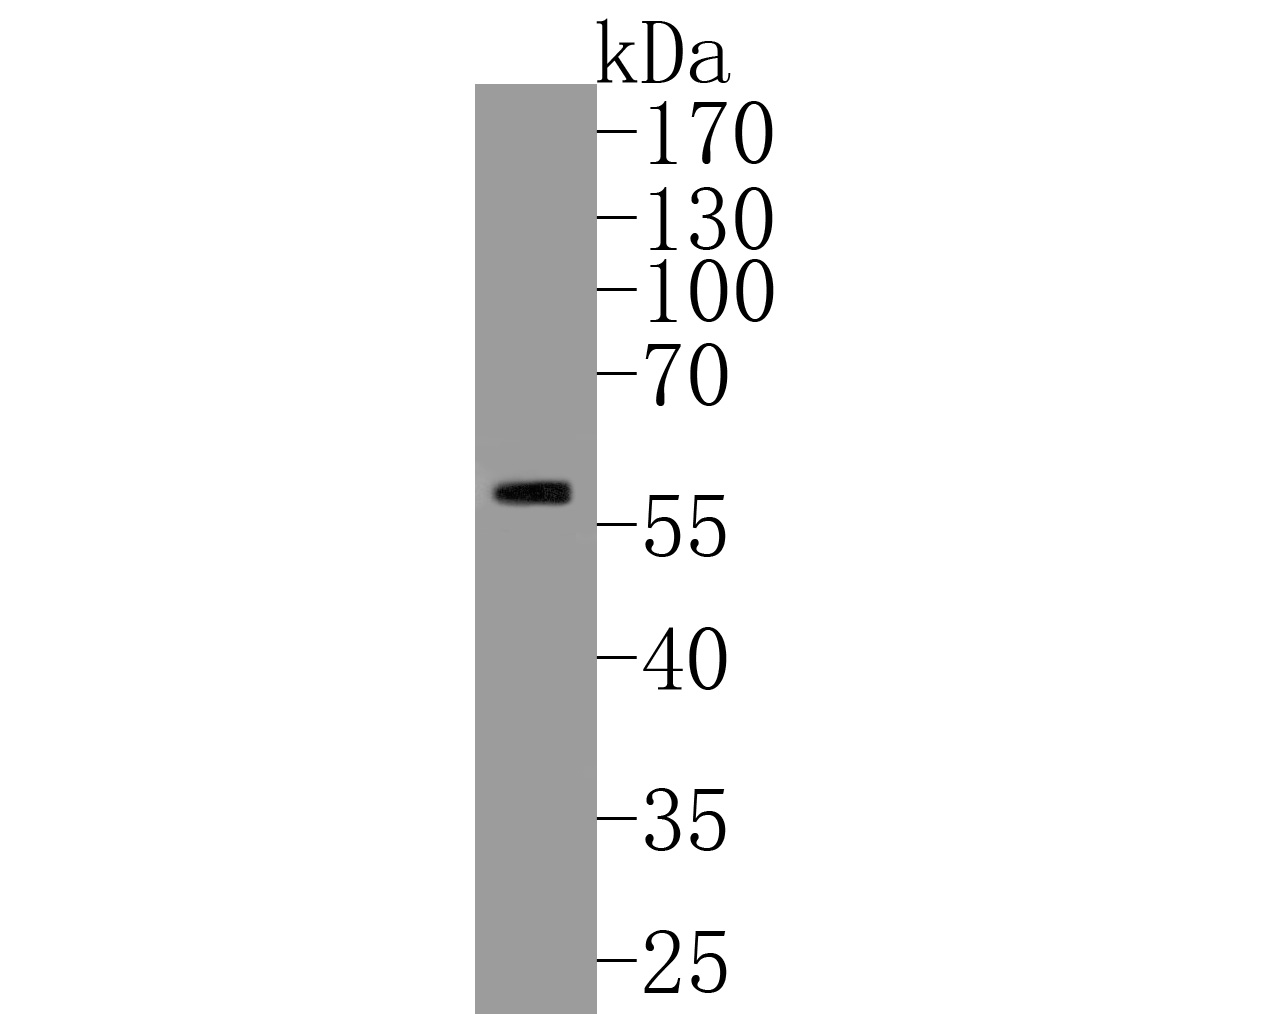 Western blot analysis of CPEB1 on rat skin tissue lysates. Proteins were transferred to a PVDF membrane and blocked with 5% BSA in PBS for 1 hour at room temperature. The primary antibody (ER1902-92, 1/500) was used in 5% BSA at room temperature for 2 hours. Goat Anti-Rabbit IgG - HRP Secondary Antibody (HA1001) at 1:5,000 dilution was used for 1 hour at room temperature.